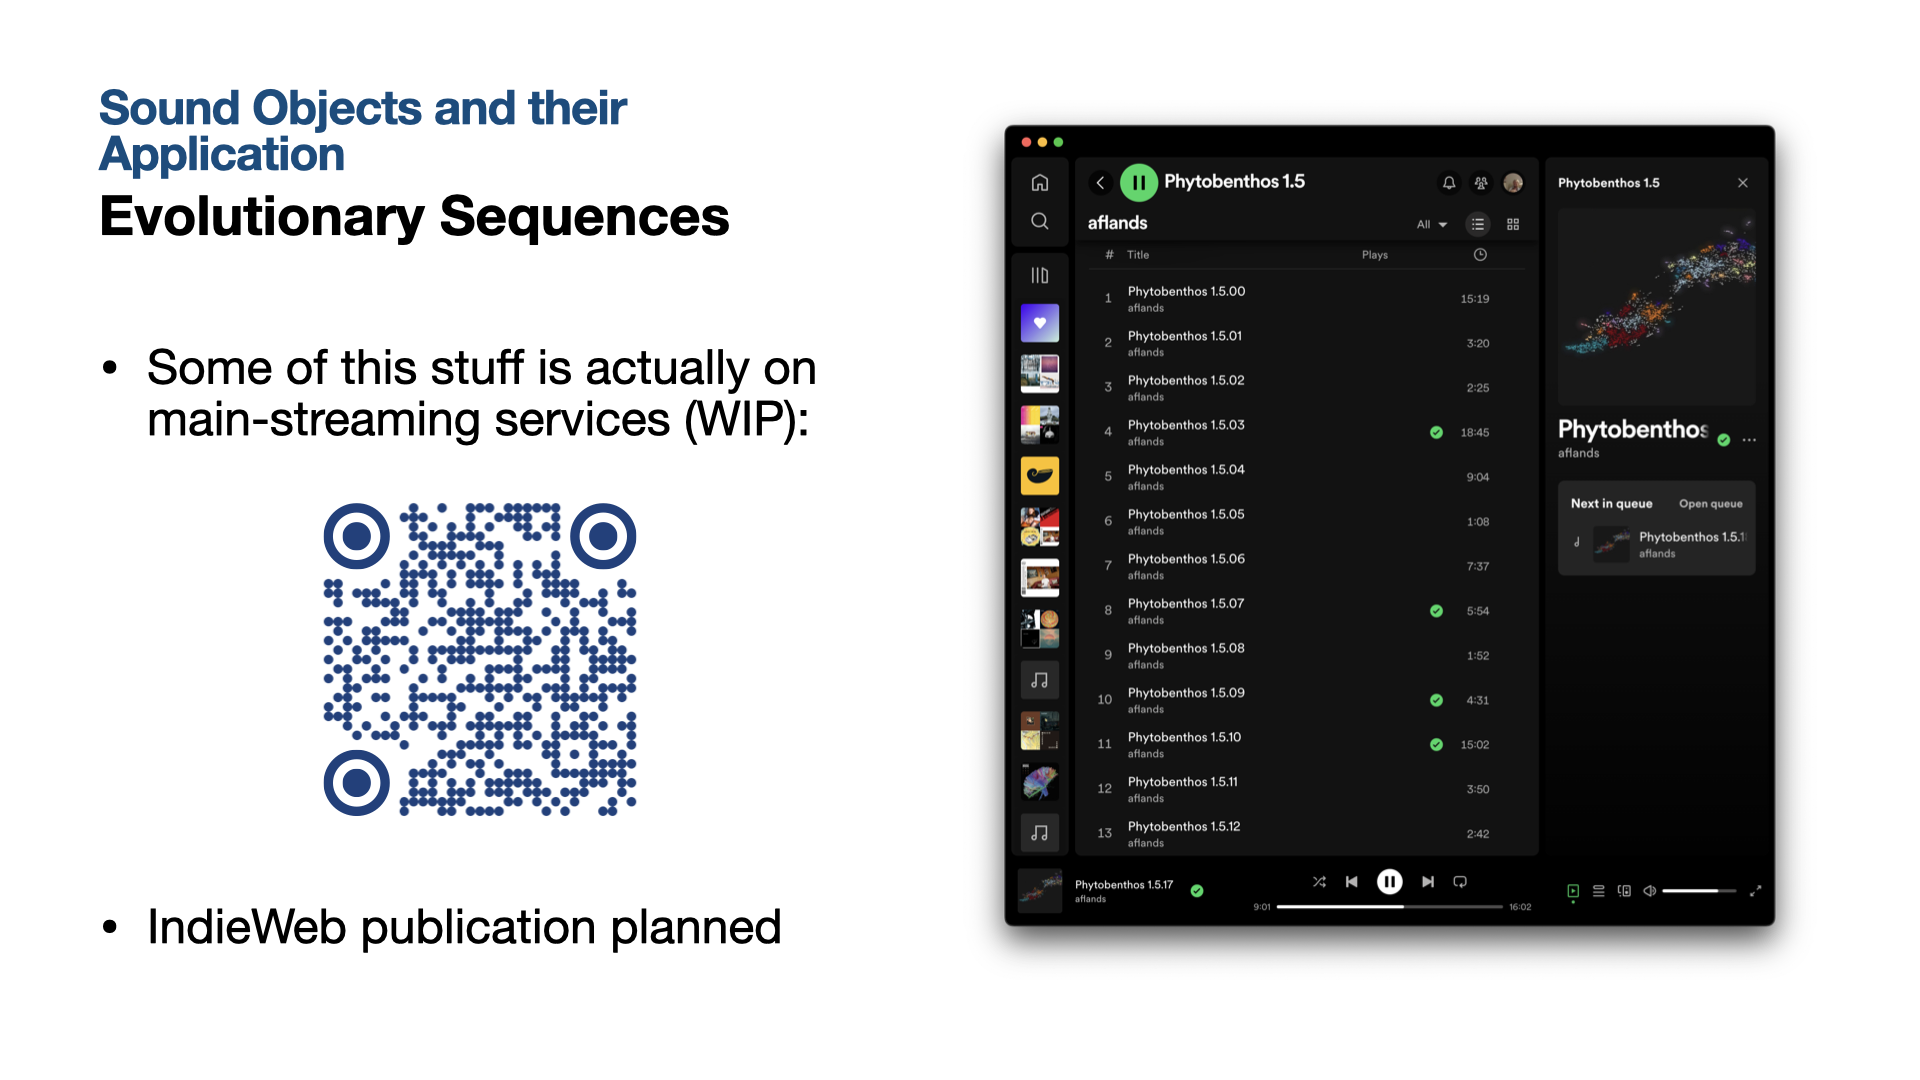 Sound Objects and their Application: Evolutionary Sequences on streaming services